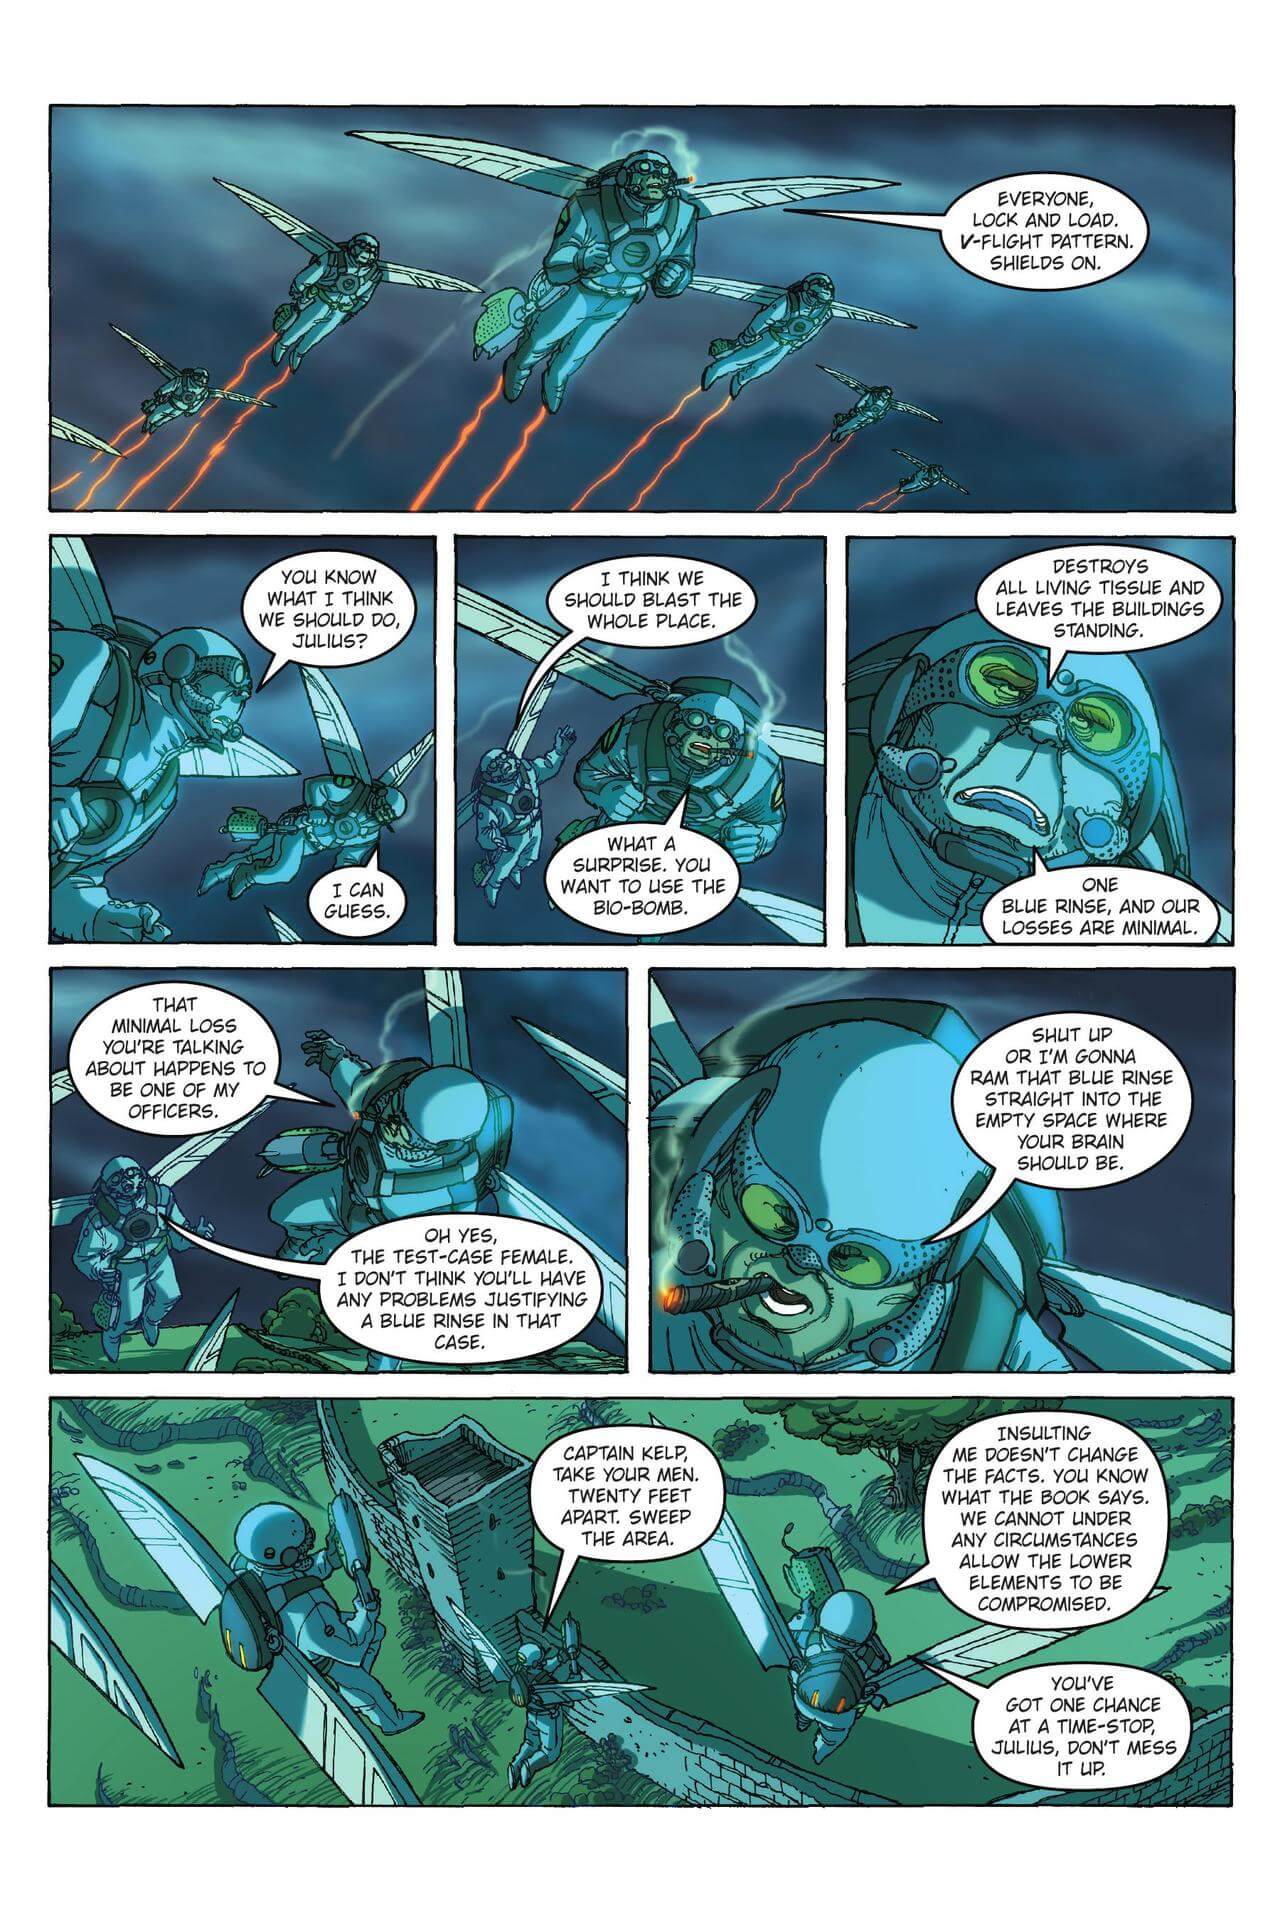 page 51 of artemis fowl the graphic novel